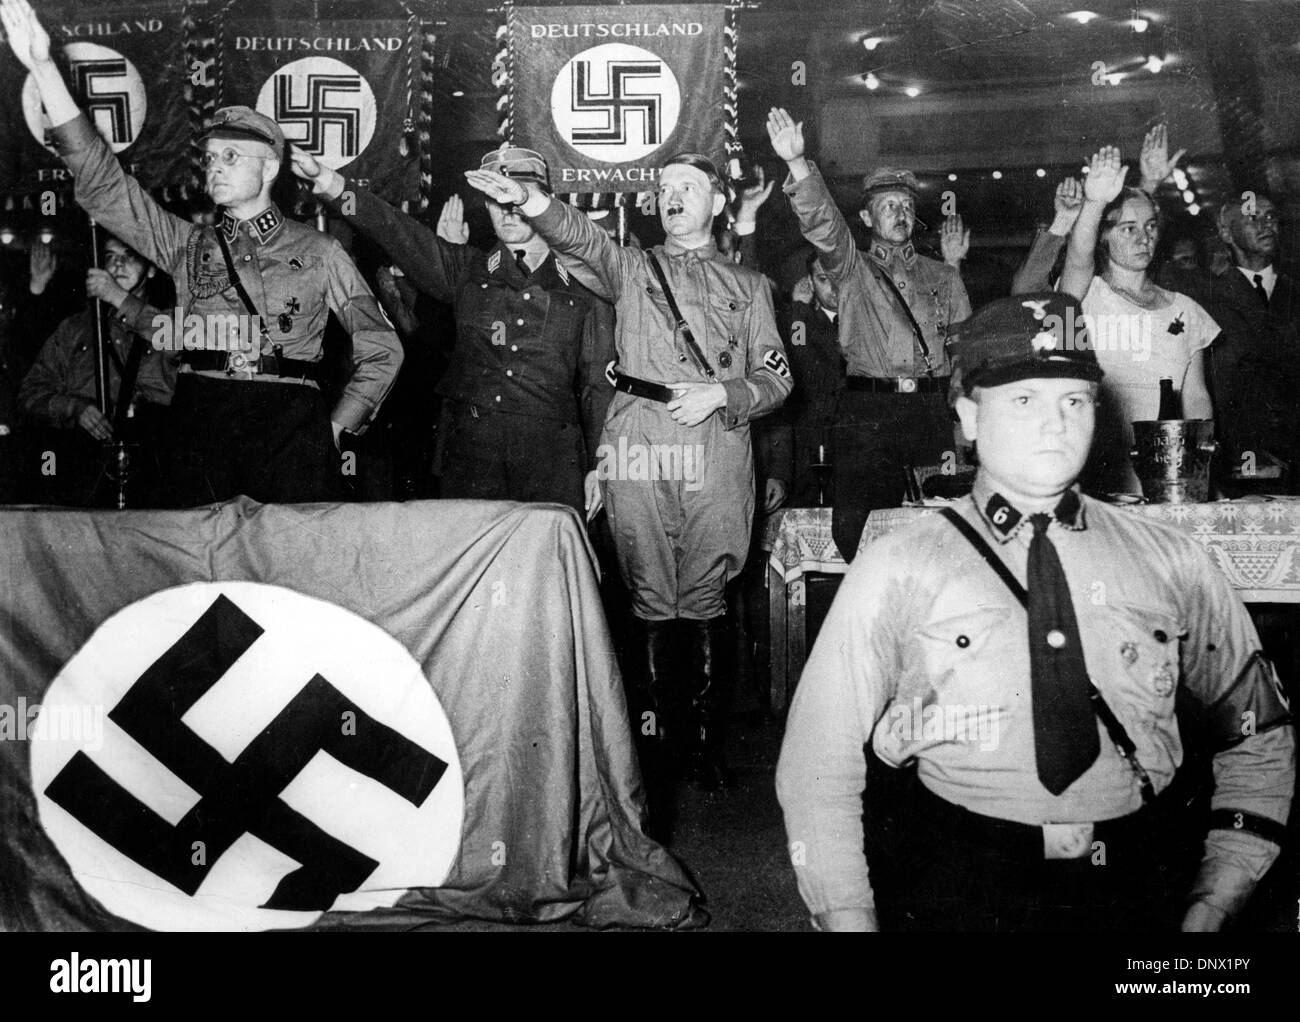 Sept. 3, 1932 - Berlin, Germany - Nazi leader ADOLF HITLER (C) saluting at the sports palace in Berlin. To the left is Prince August Wilhelm. (Credit Image: © KEYSTONE Pictures USA/ZUMAPRESS.com) Stock Photo